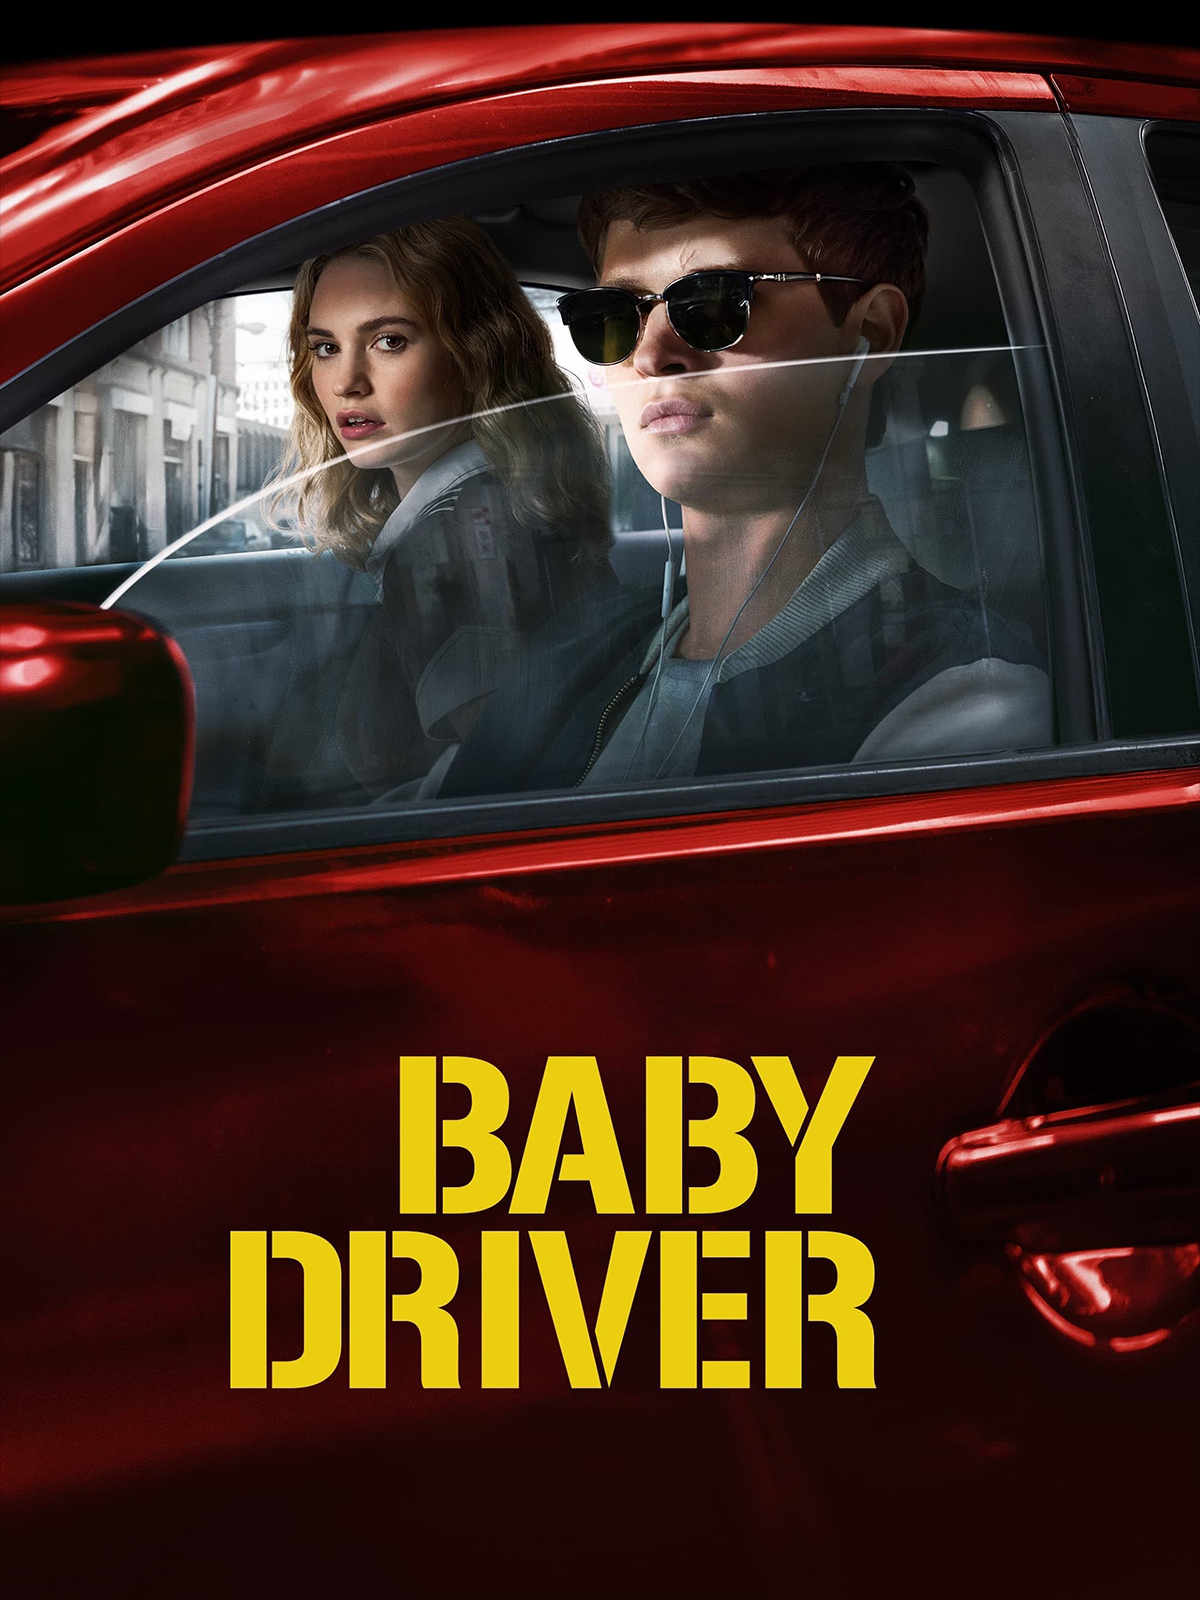 chris bianchino recommends baby driver putlockers hd pic